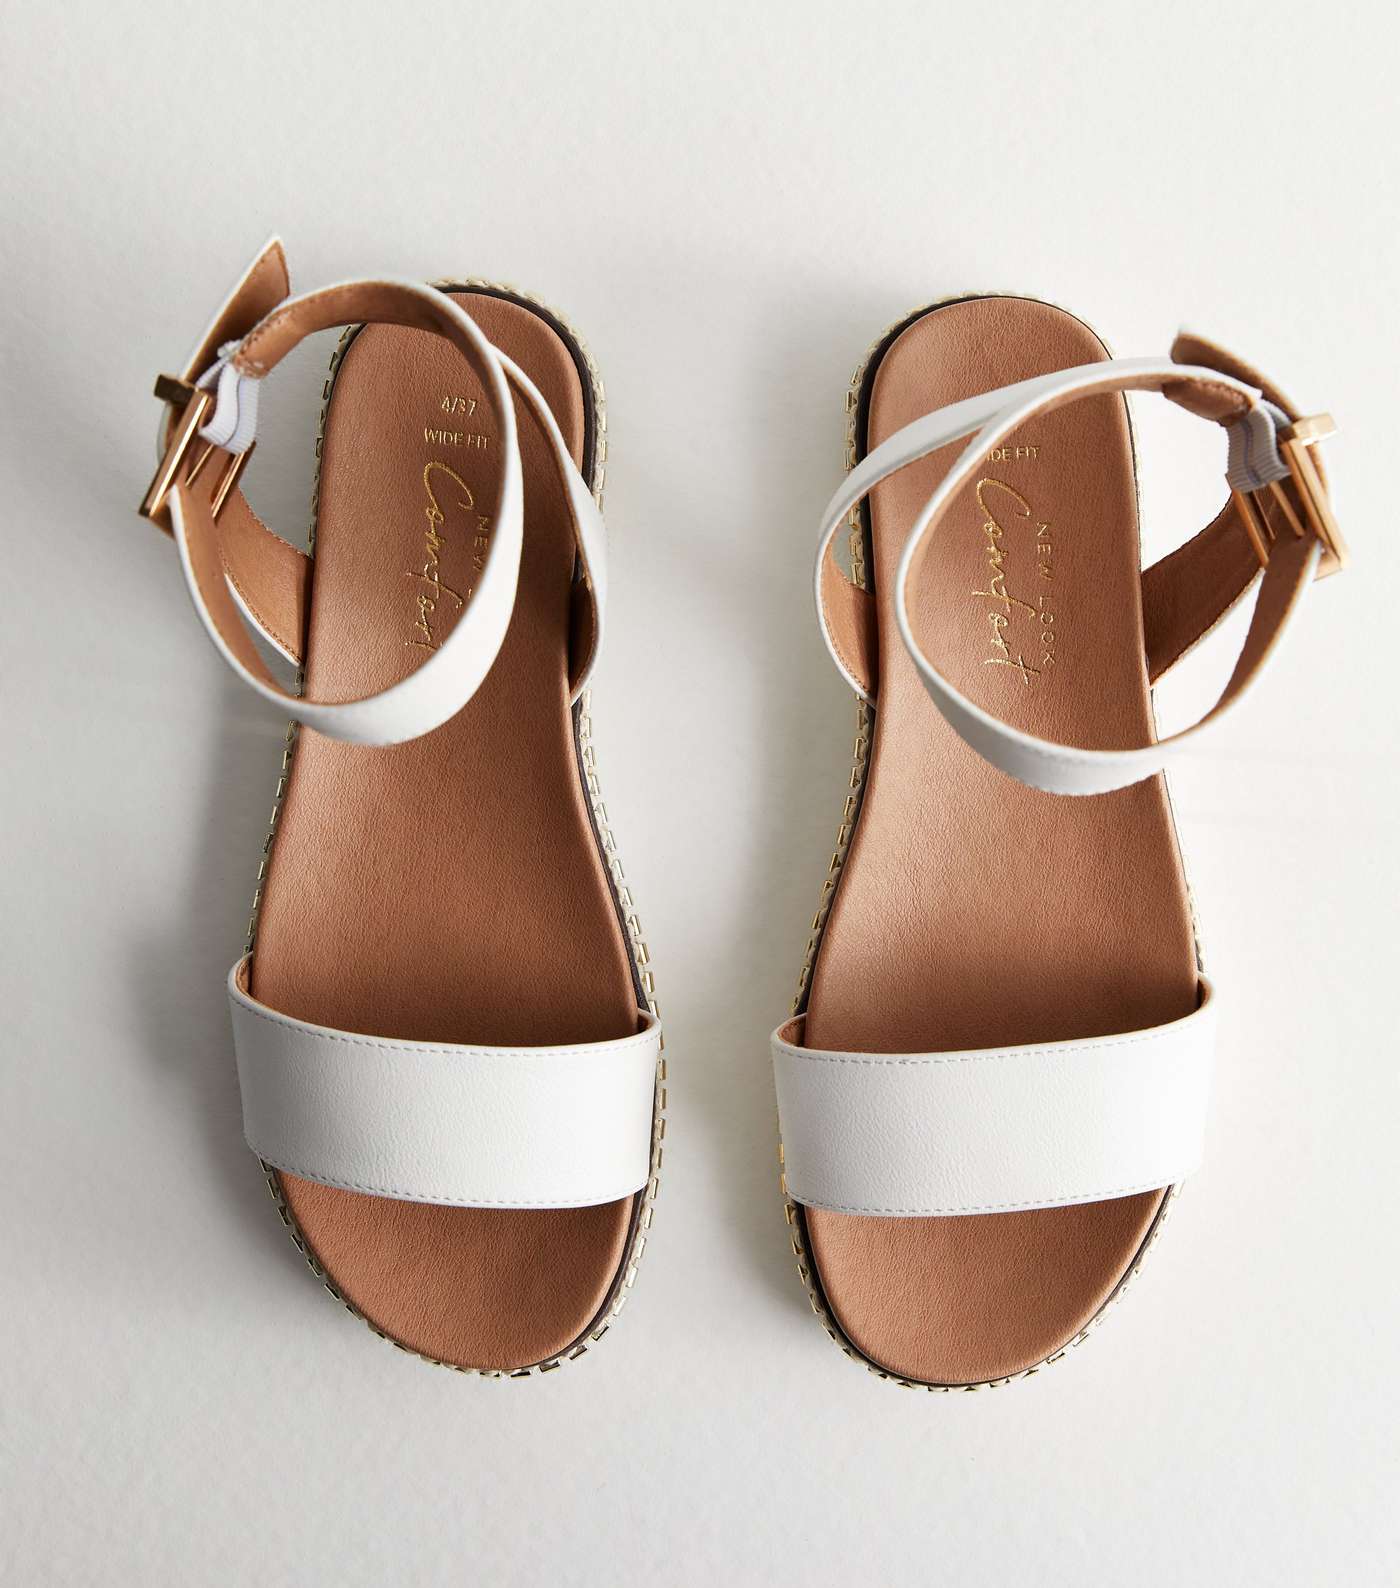 Wide Fit White Leather-Look 2 Part Gold Trim Sandals Image 3